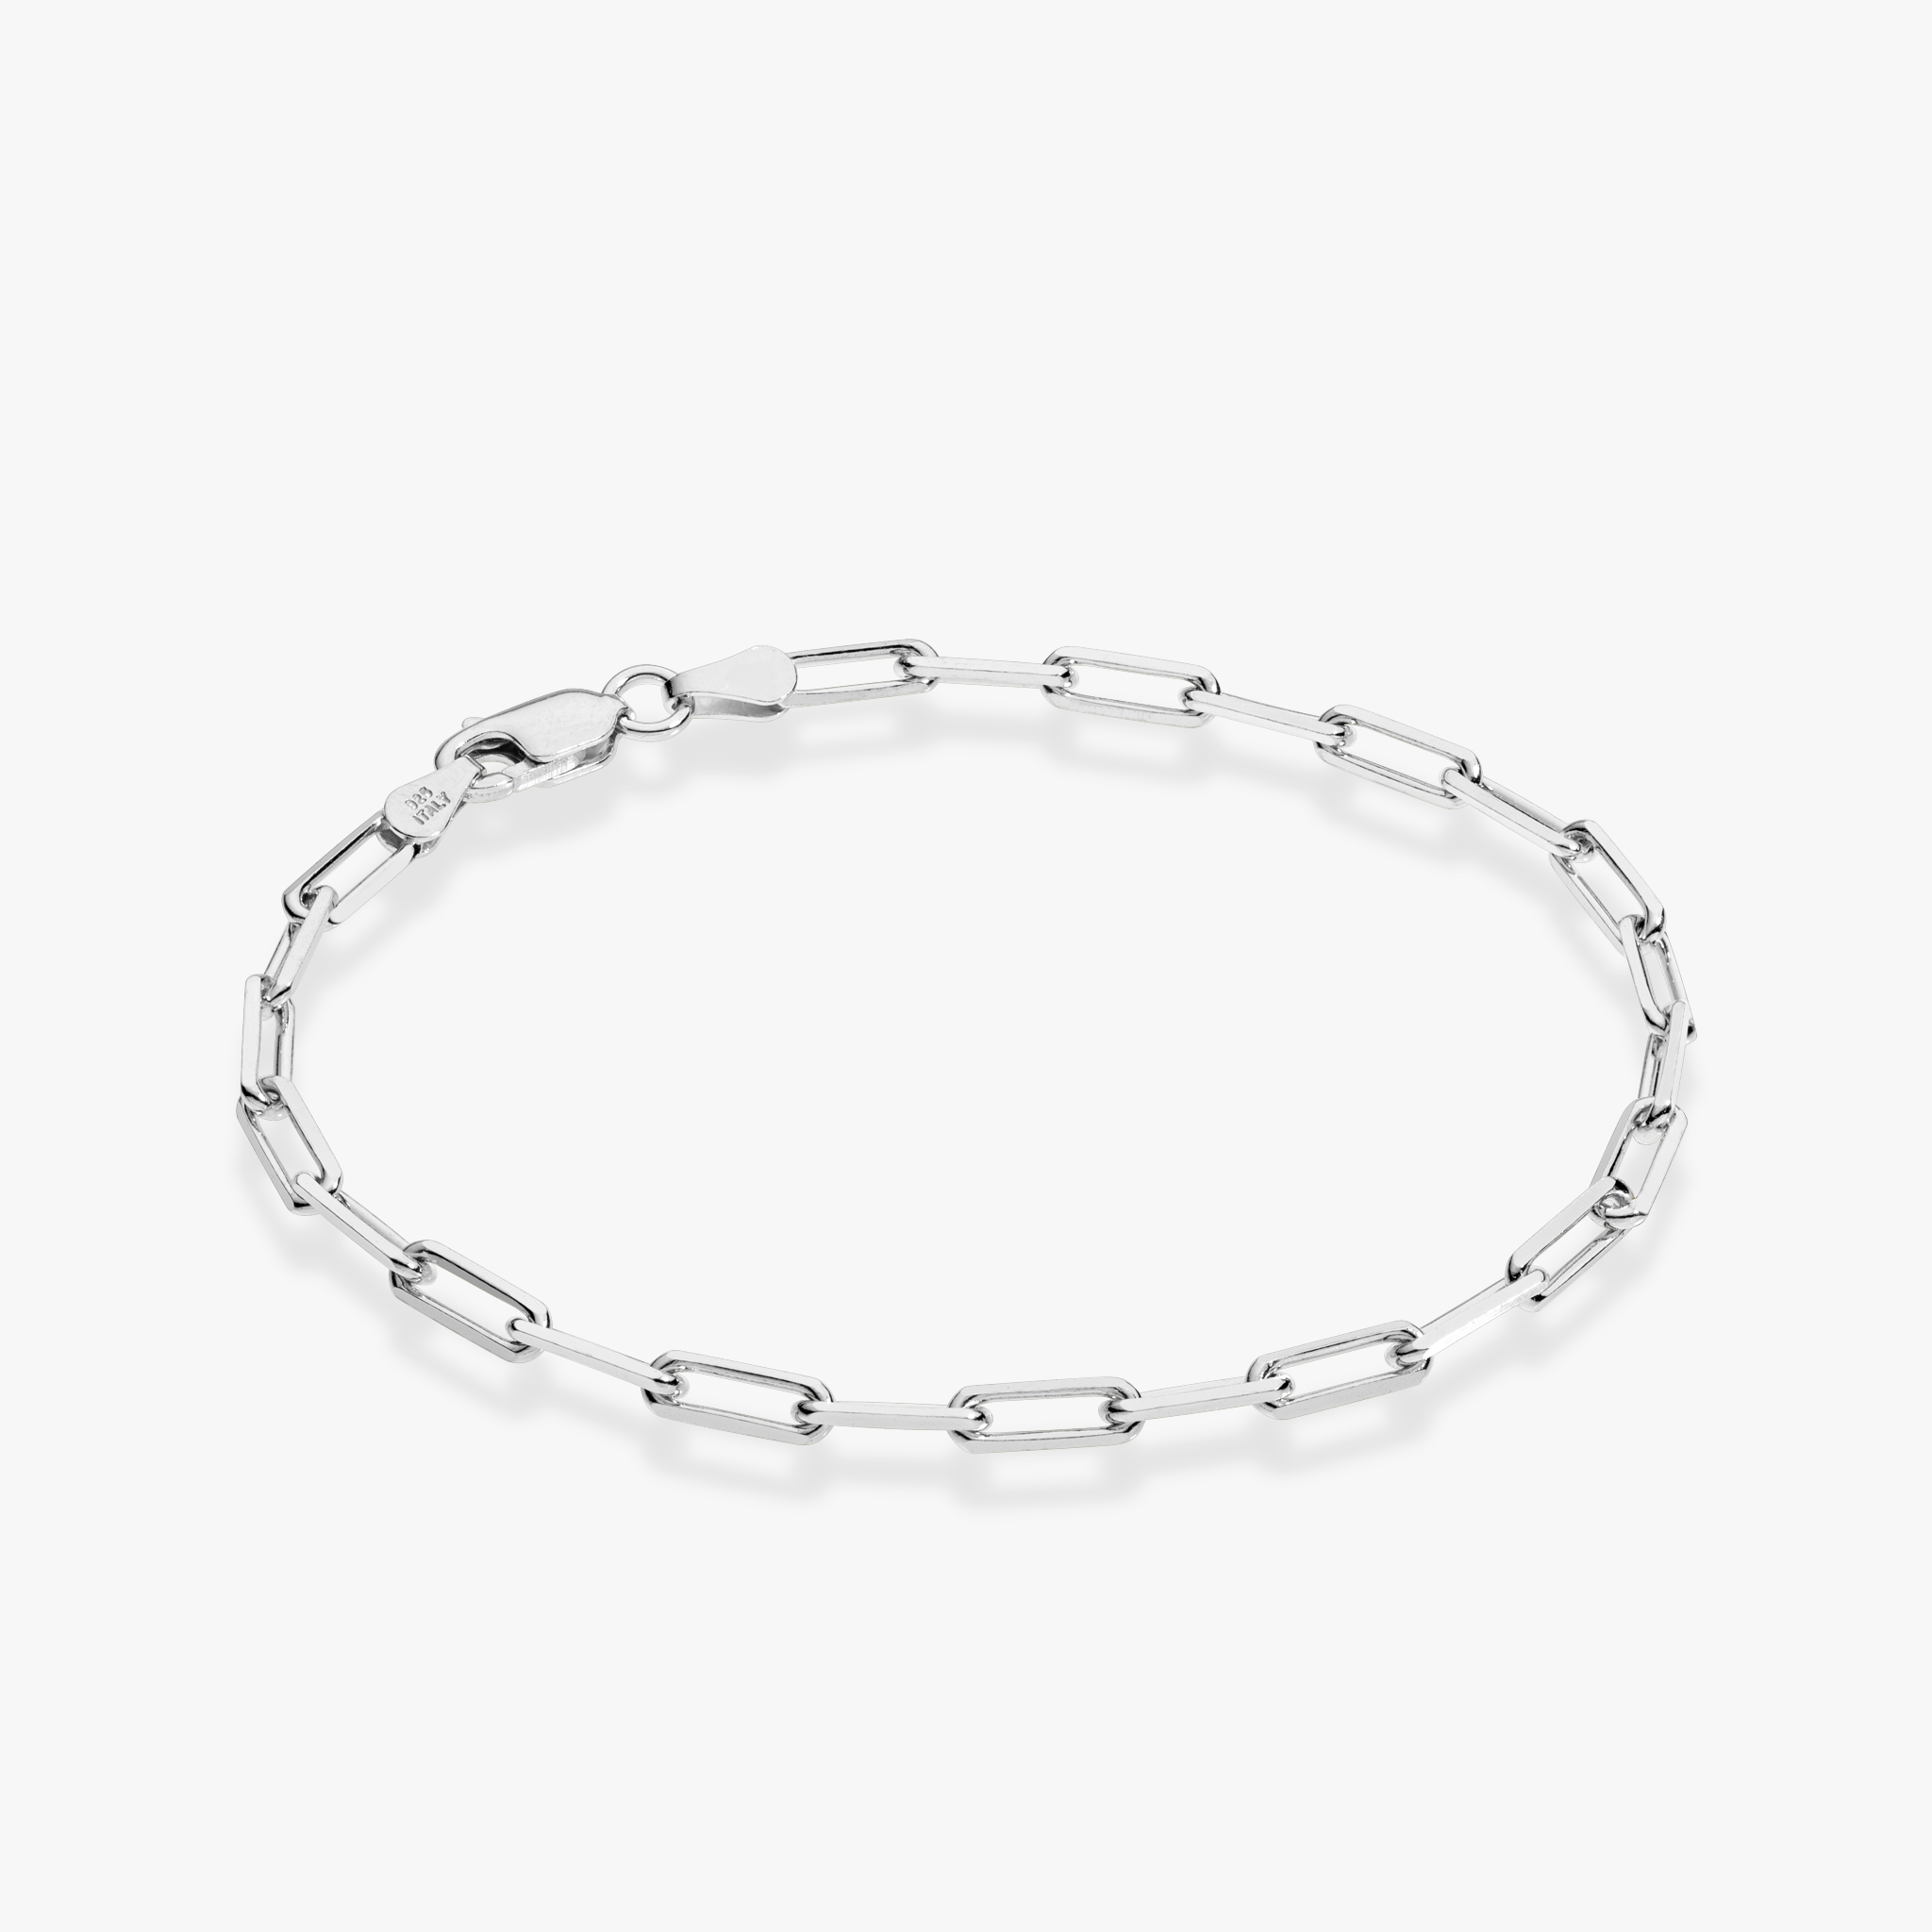 Sterling Silver Bracelet made with Diamond Cut Paperclip Chain (3mm) and  Reversible CZ Infinity (24x8mm) in Center , Measures 6.75 Long, Plus 1.25  Extender for Adjustable Length, Rhodium Finish - Reflections Fine Jewelry